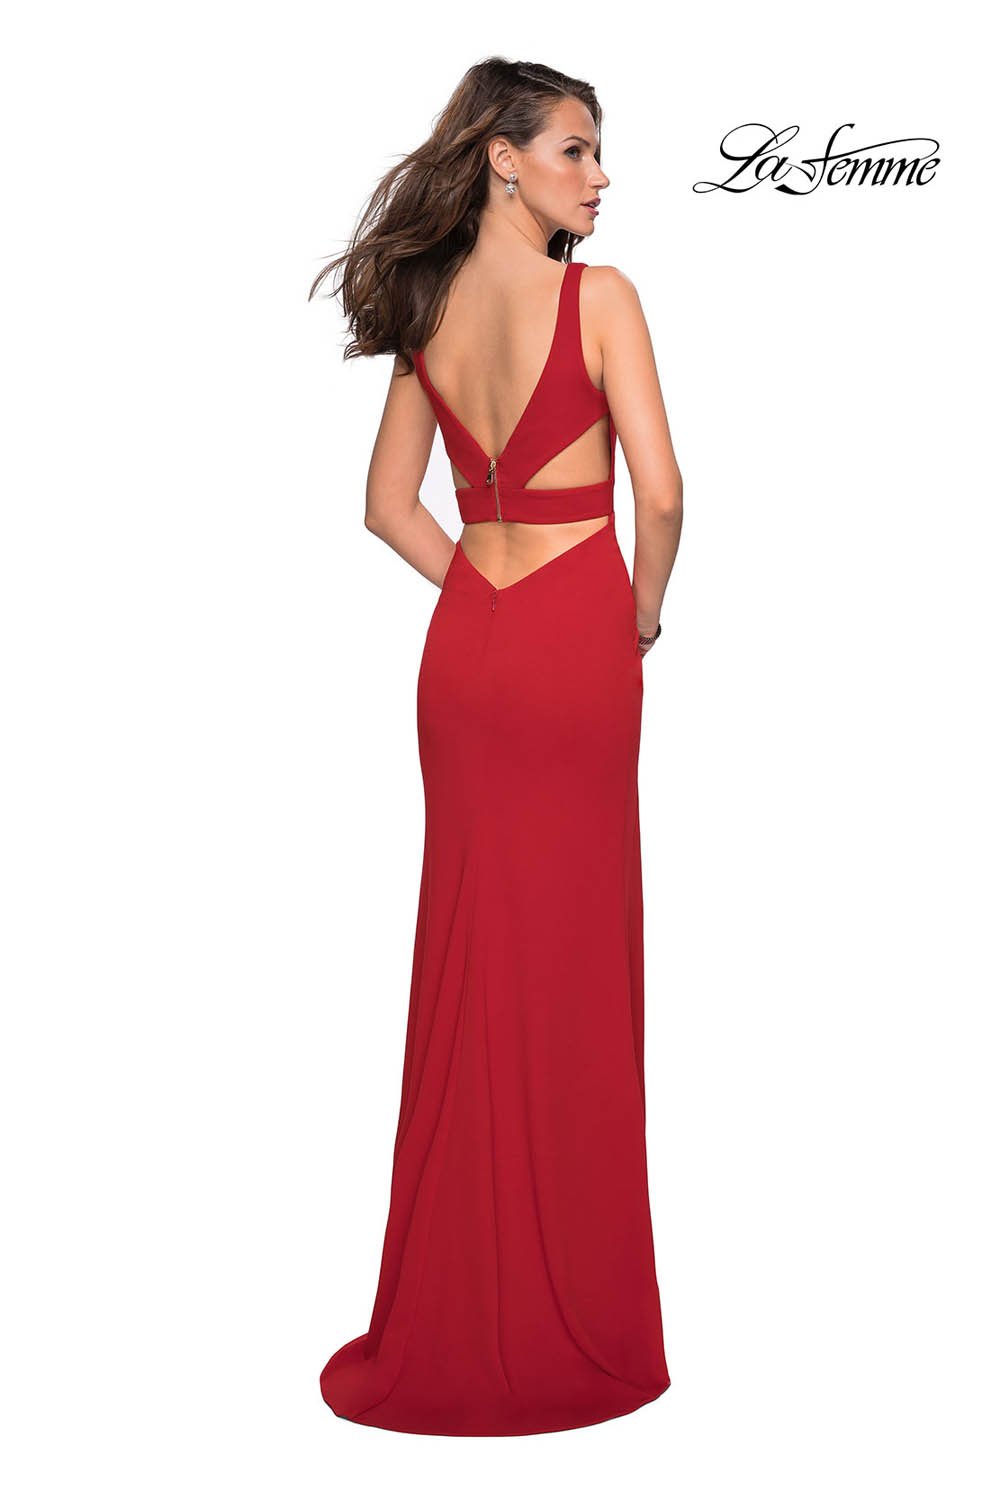 La Femme 27181 dress images in these colors: Black, Red, White, Yellow.